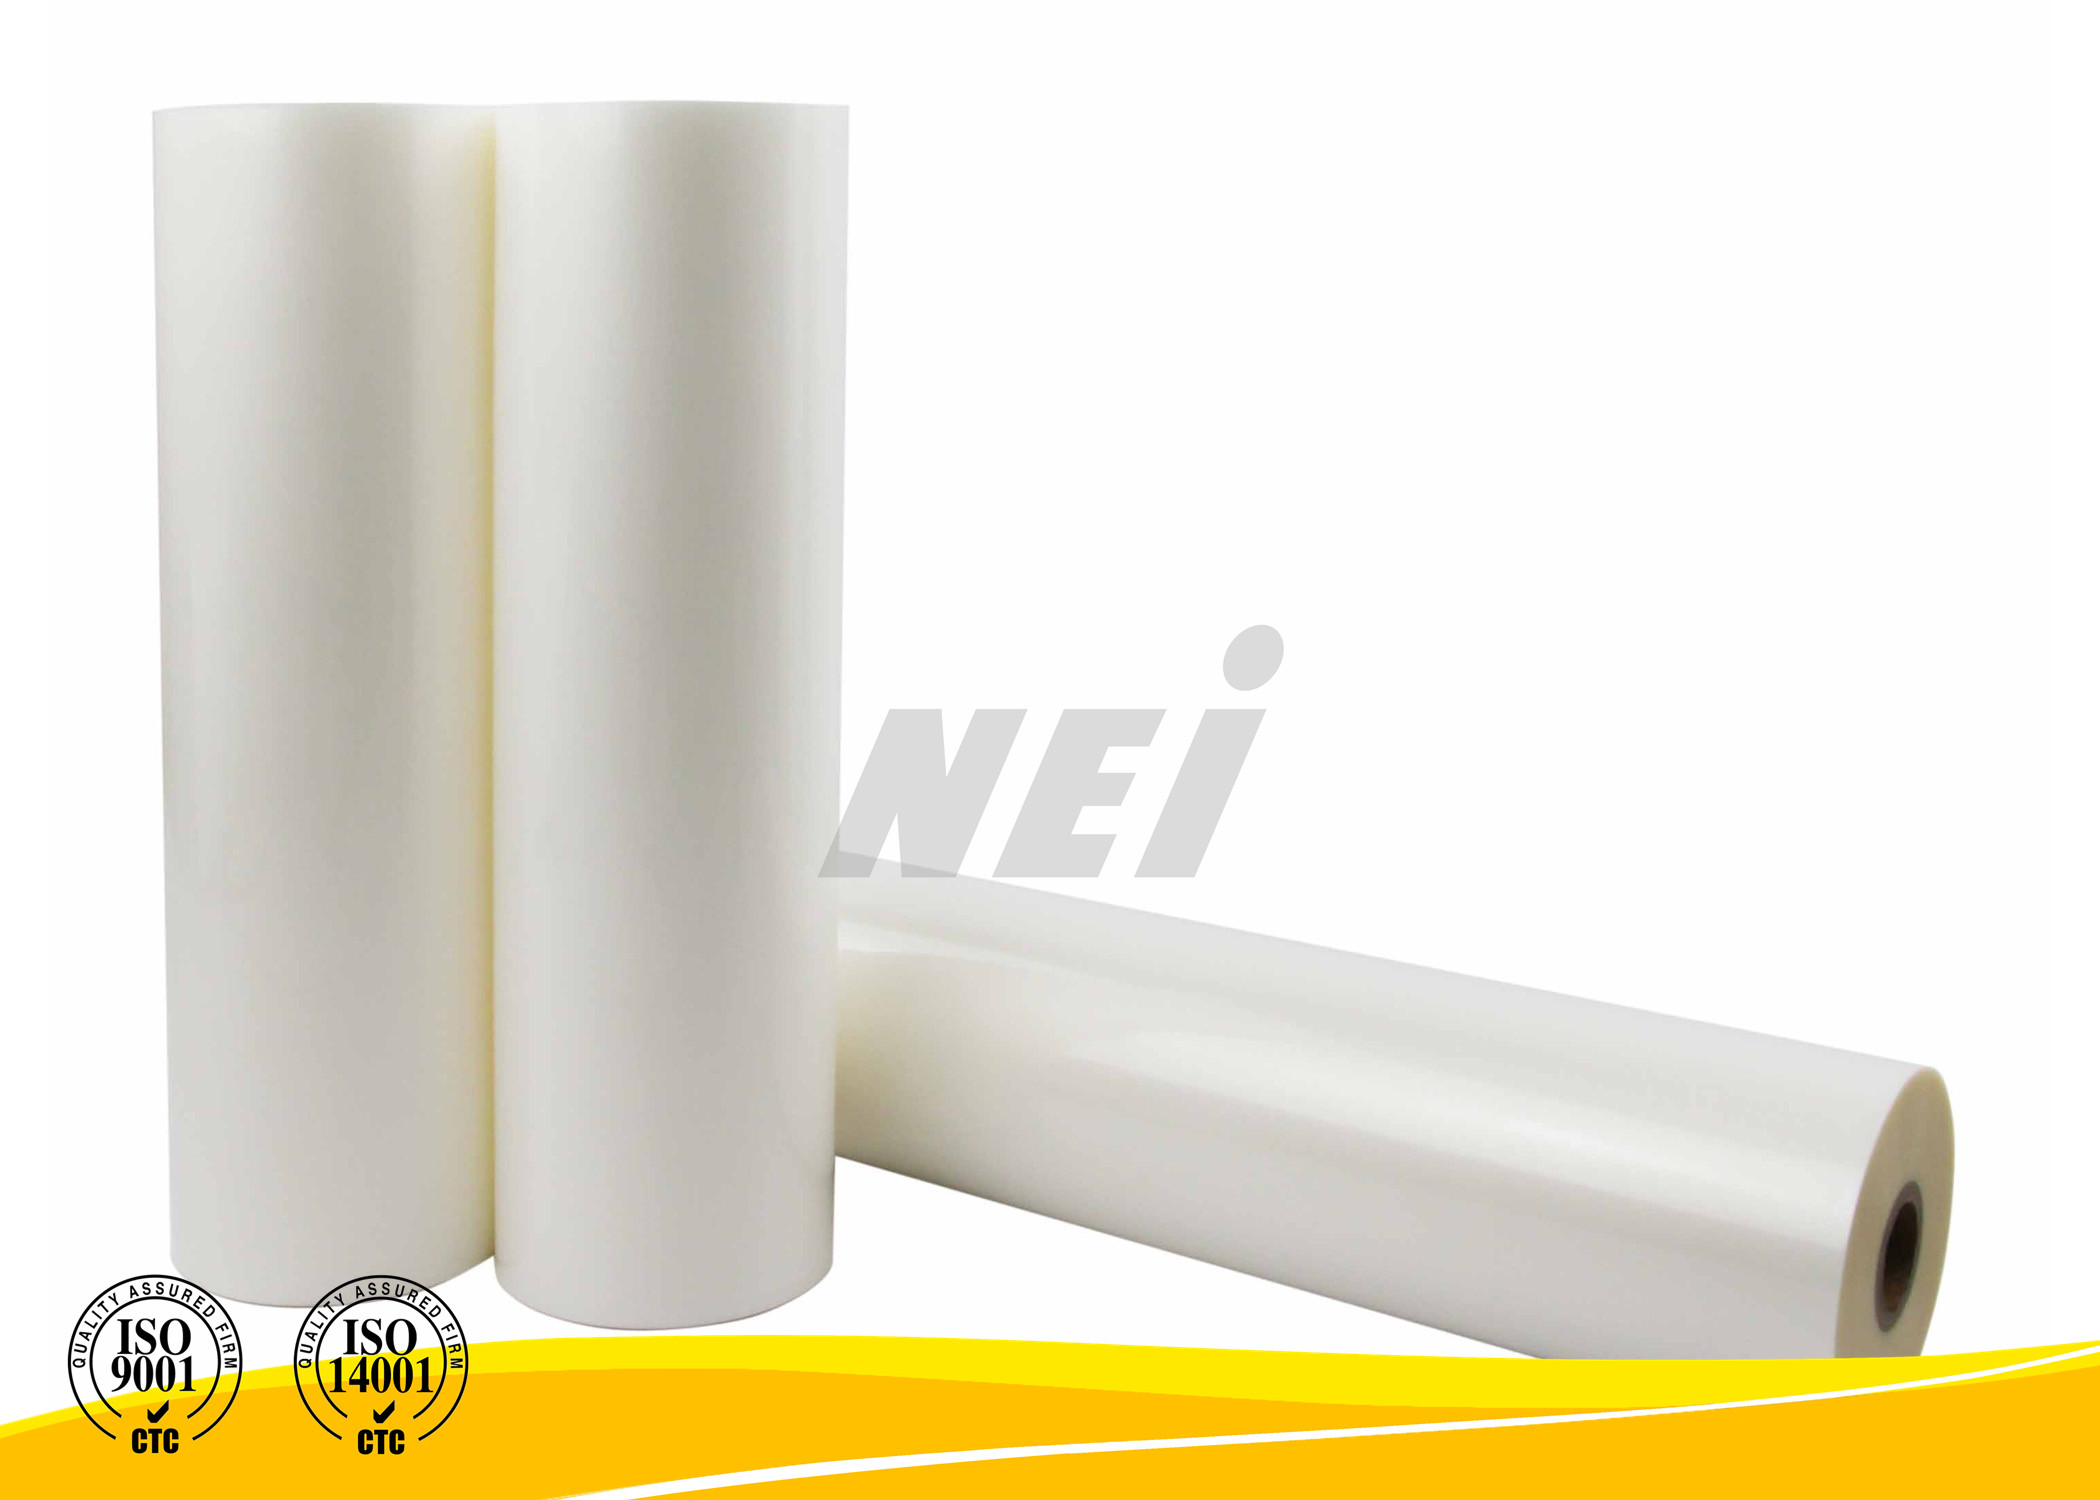  High Efficiency PVC PET Thermal Lamination Film Double Side Corona Treated Manufactures